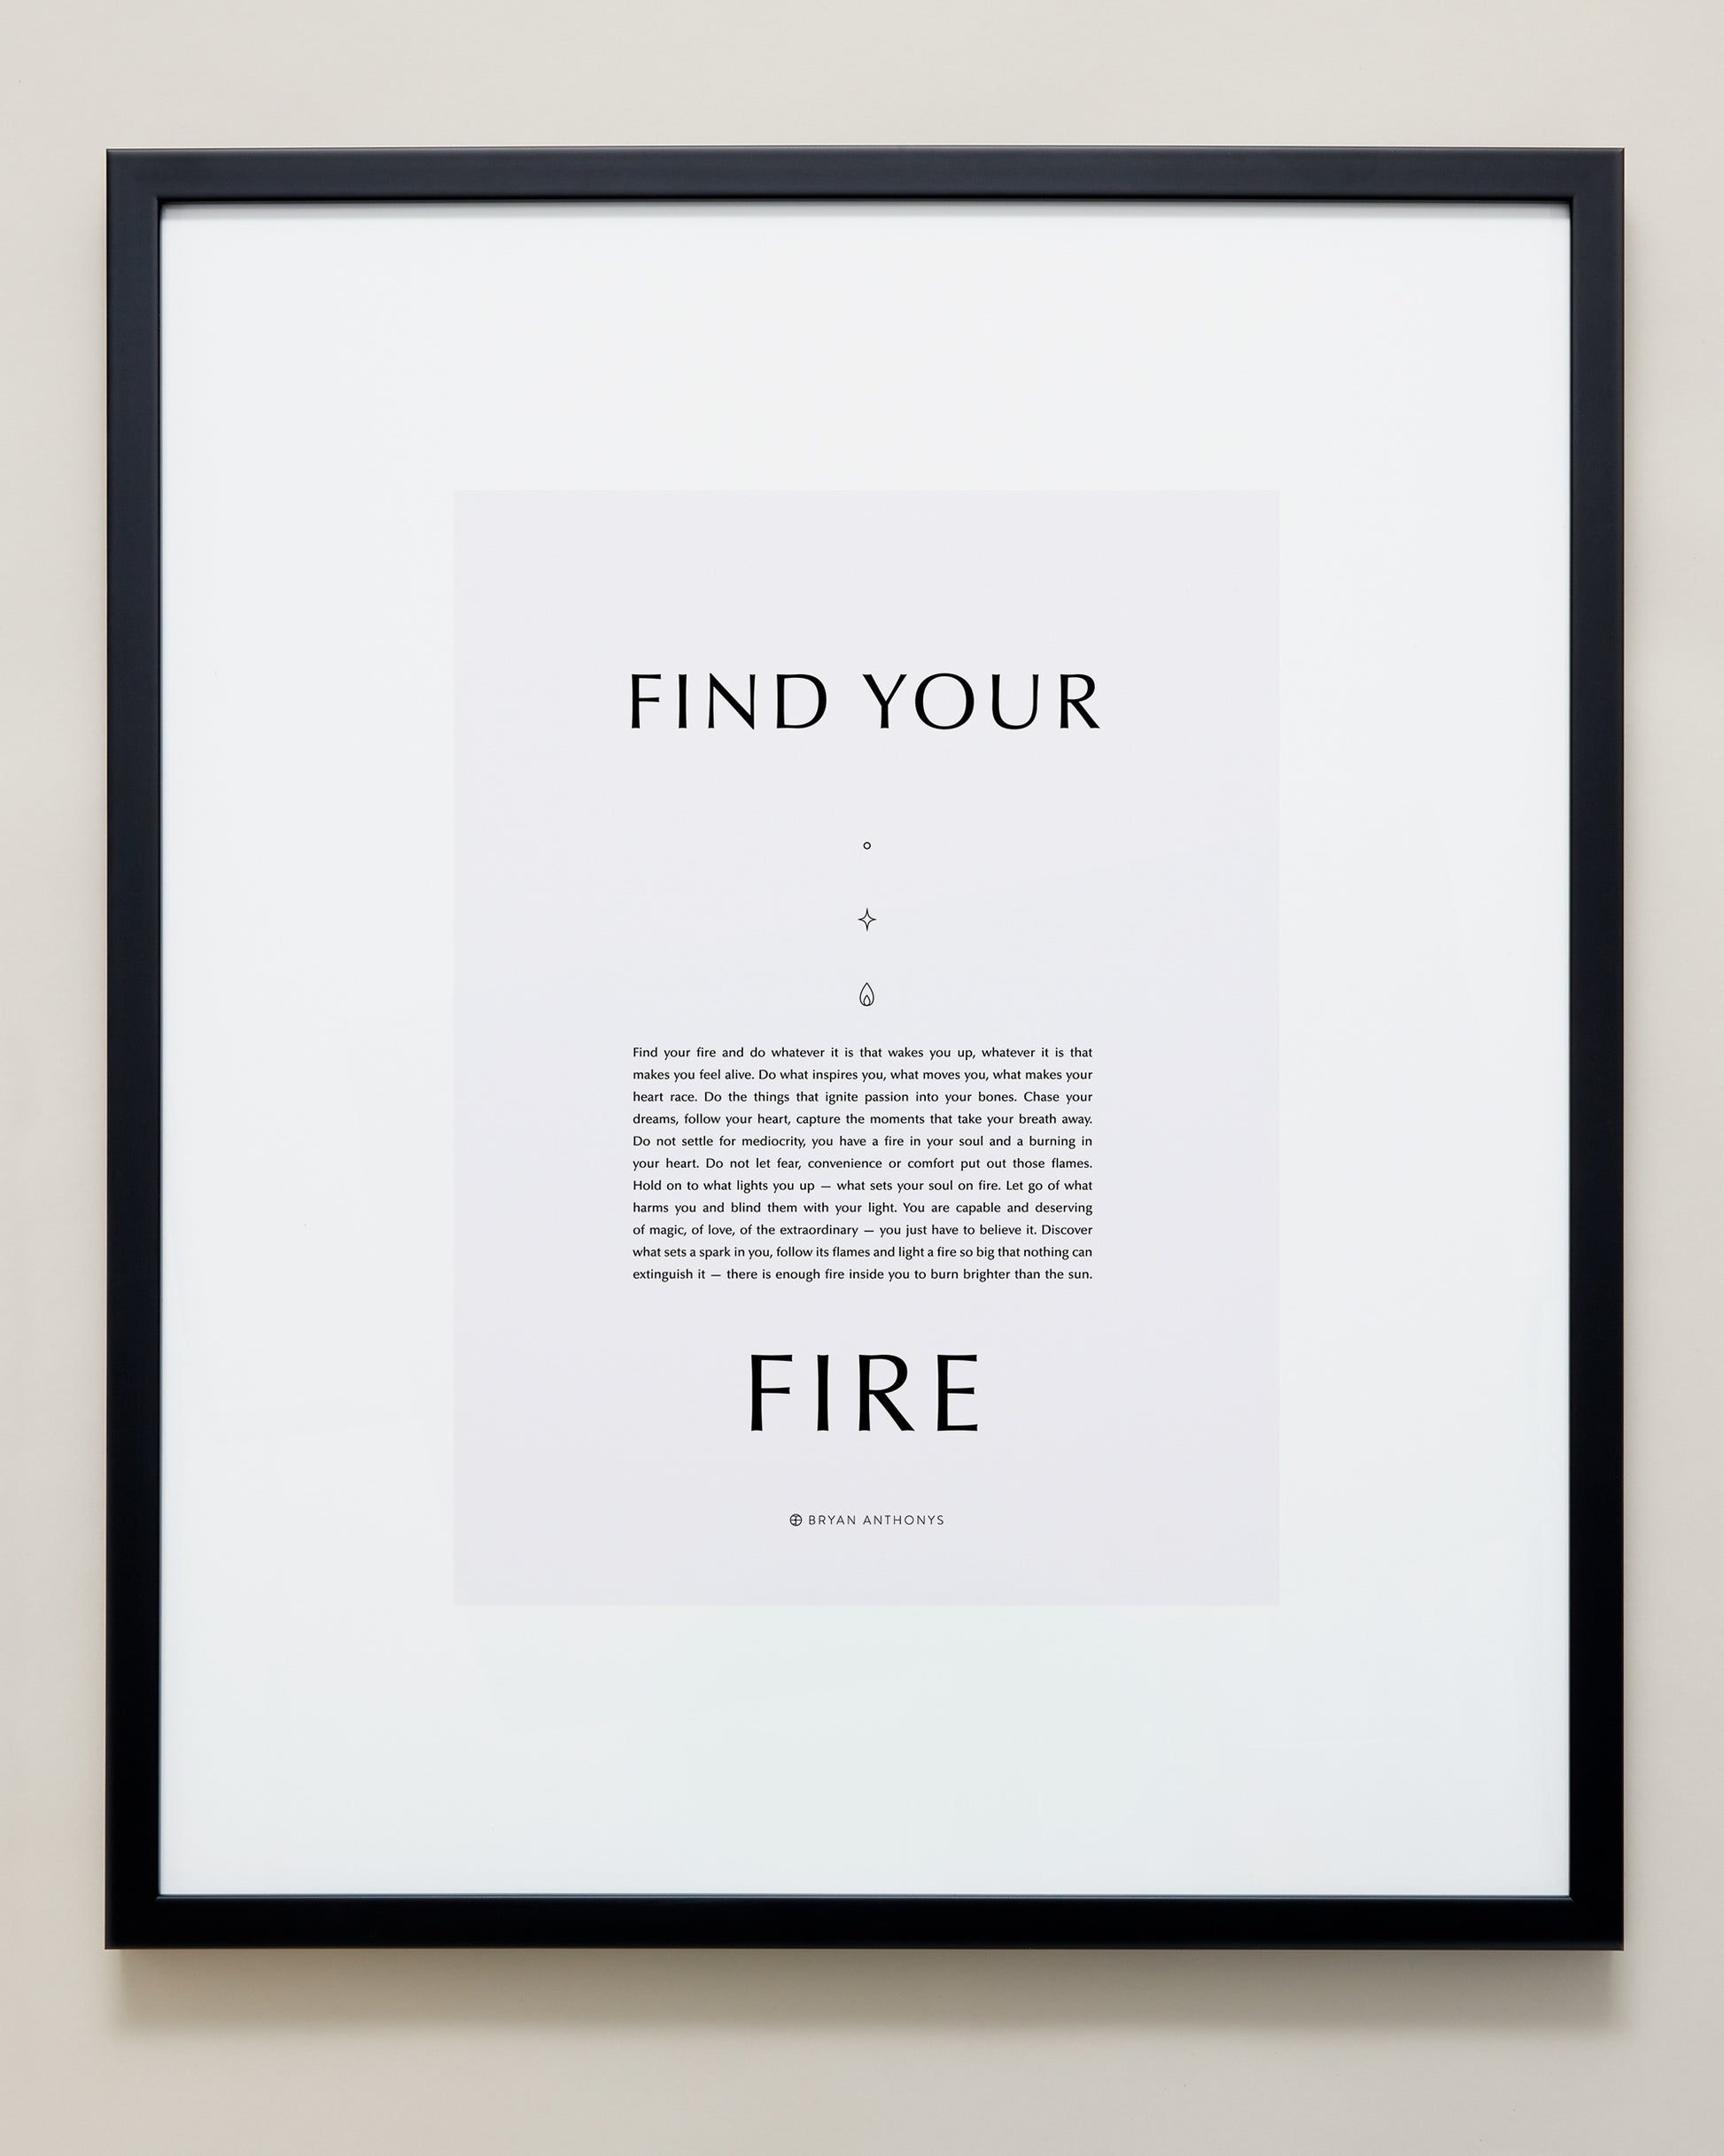 Bryan Anthonys Home Decor Purposeful Prints Find Your Fire Iconic Framed Print Gray Art with Black Frame 20x24